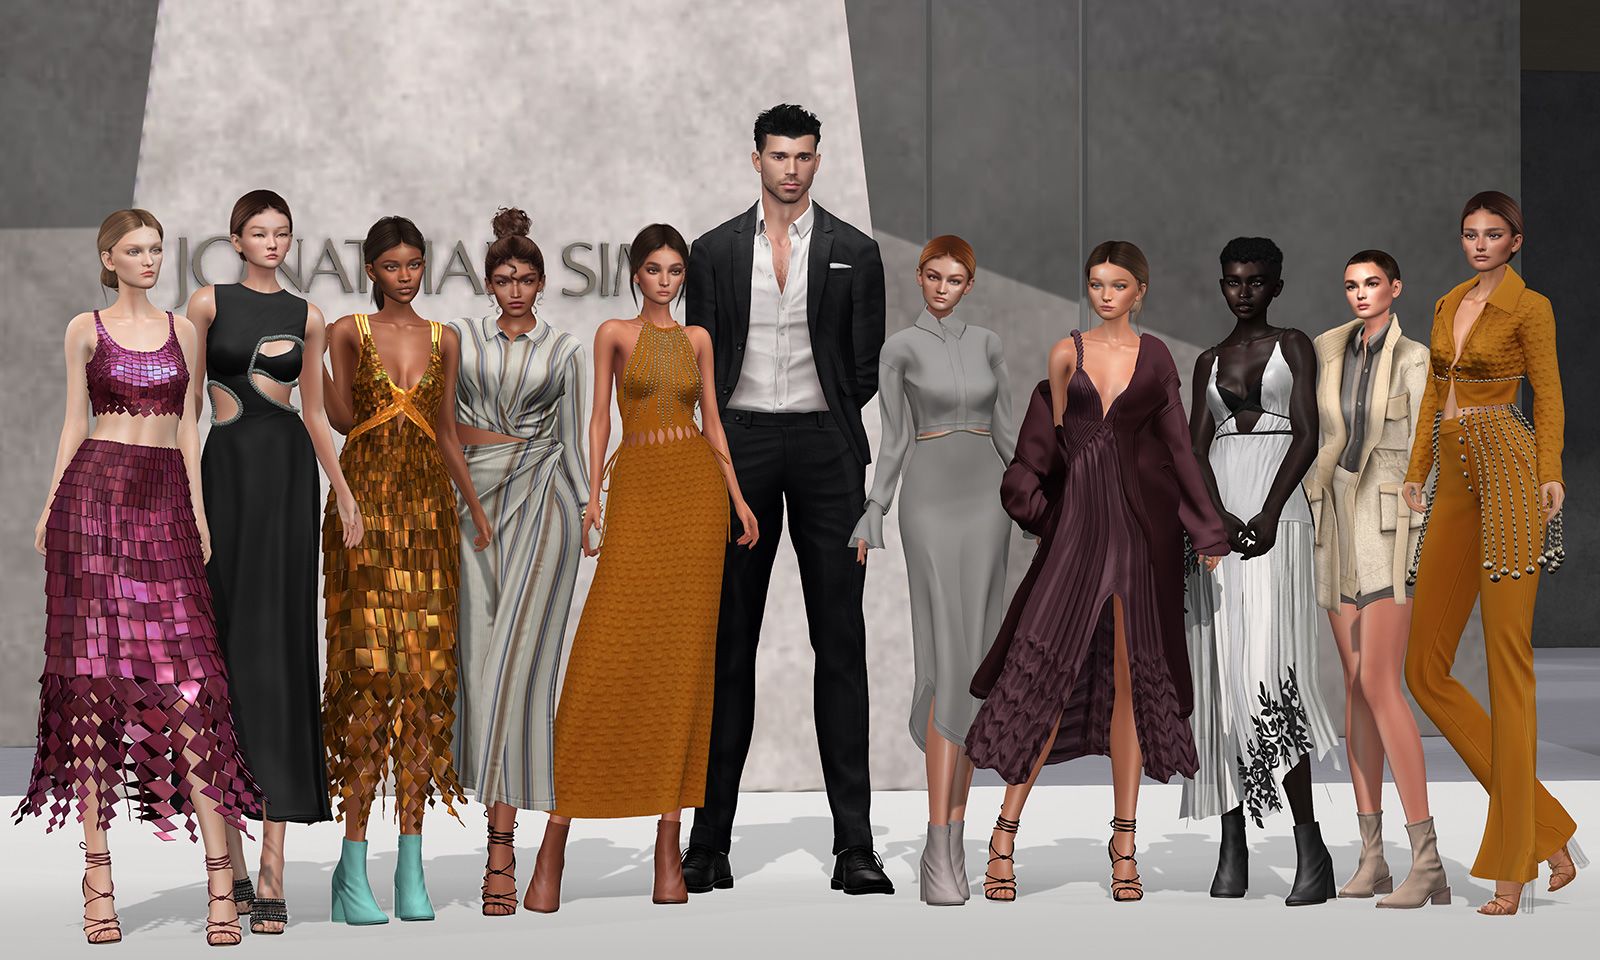 You can thank The Sims for rise of luxury fashion in gaming CNN